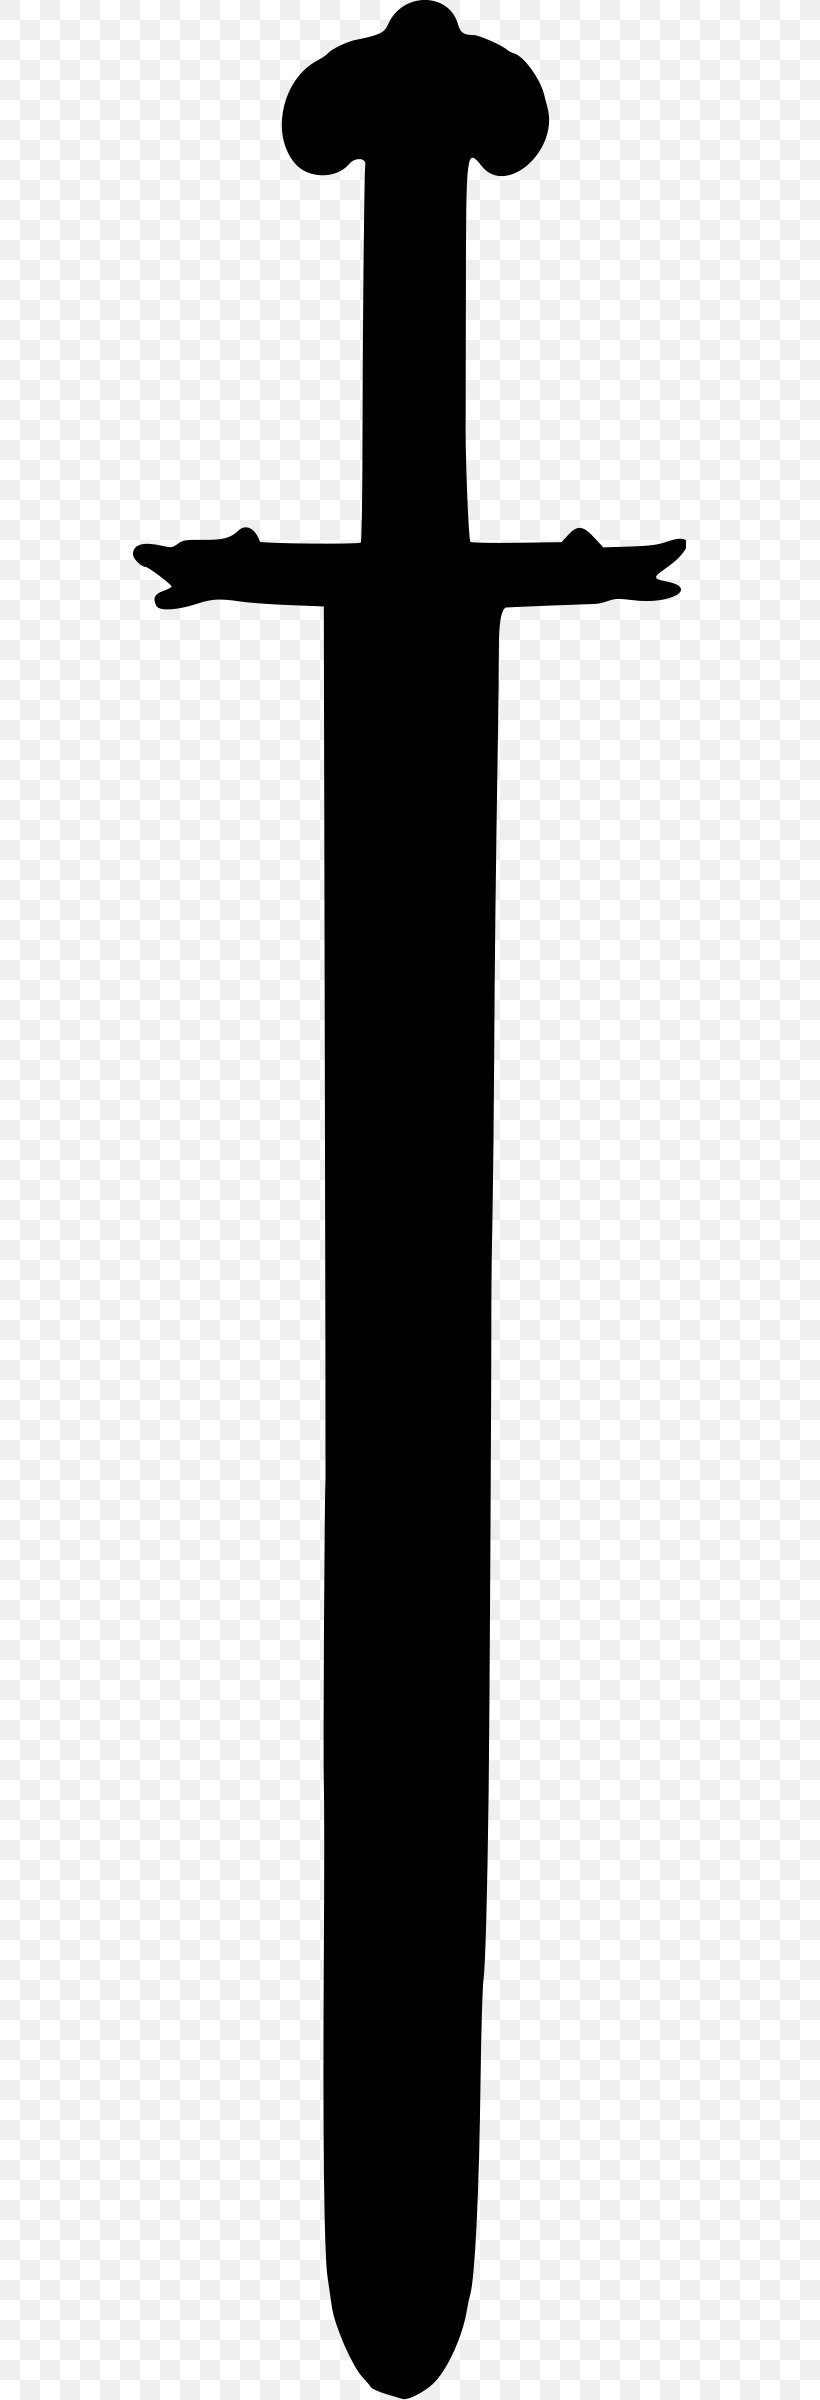 Silhouette Classification Of Swords Viking Sword, PNG, 553x2400px, Silhouette, Black, Black And White, Classification Of Swords, Combat Download Free